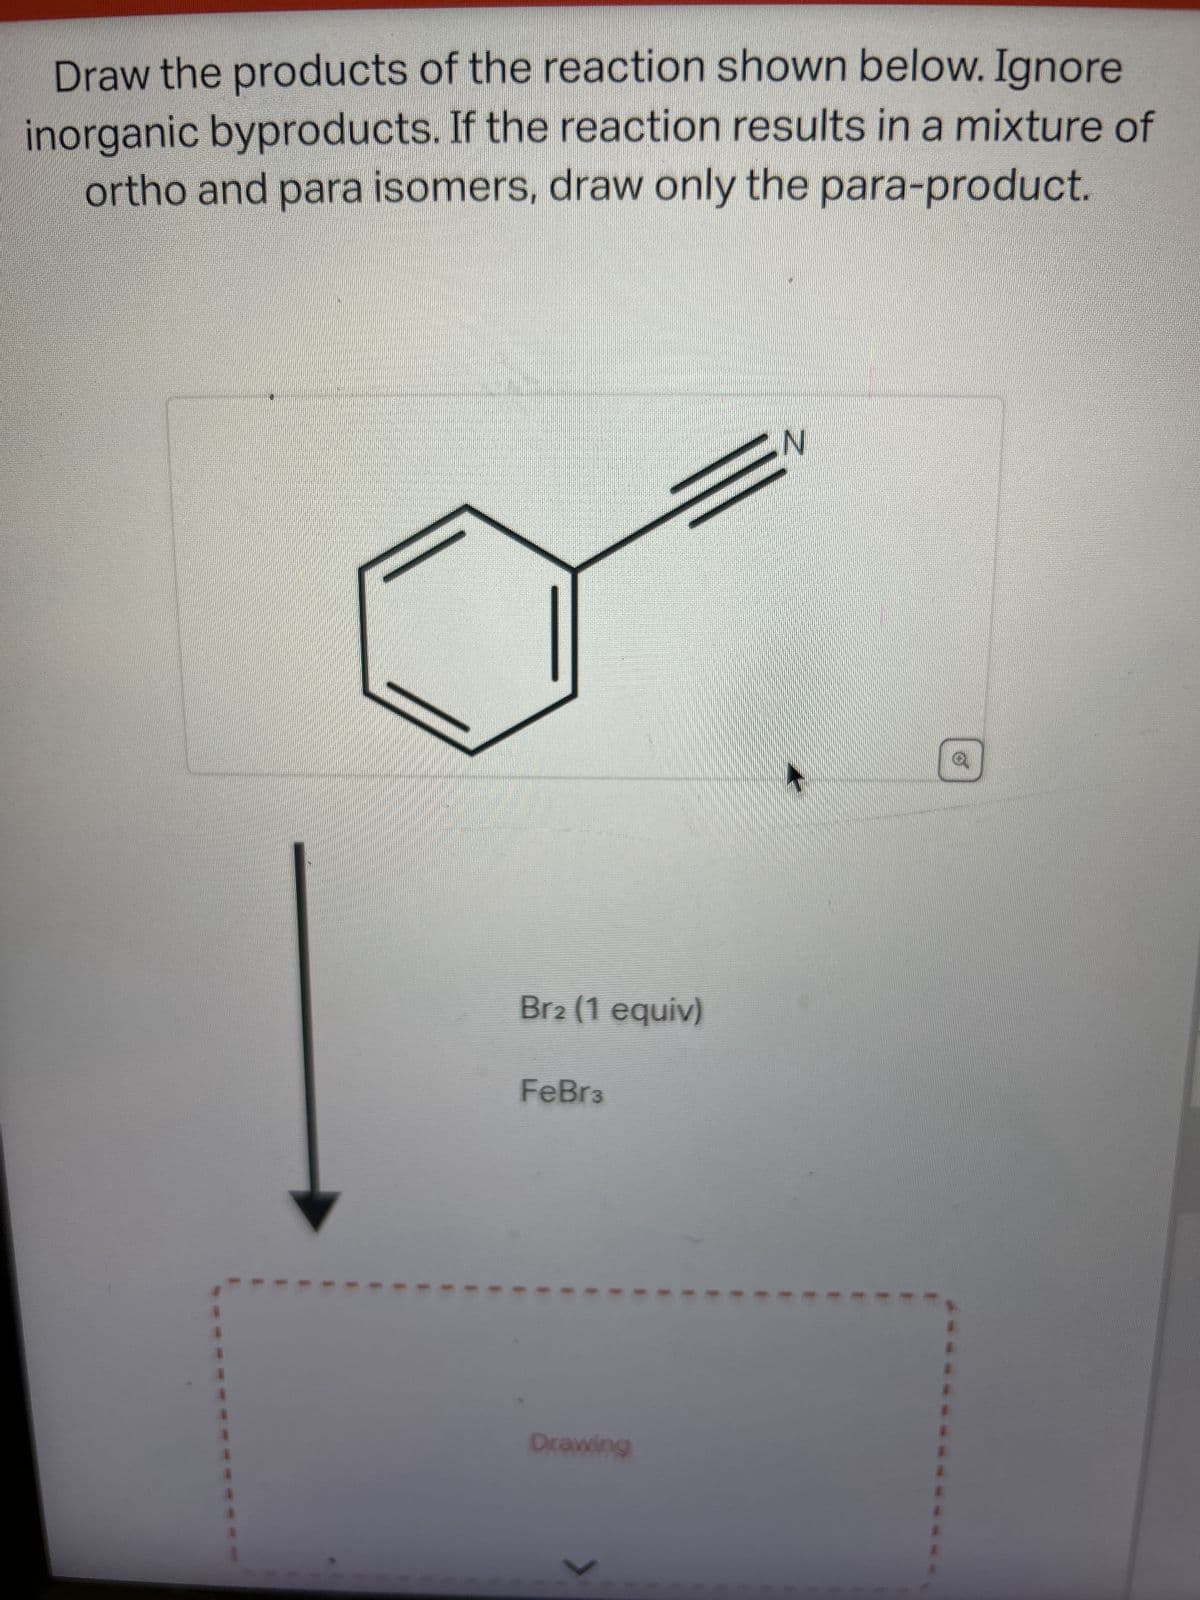 Draw the products of the reaction shown below. Ignore
inorganic byproducts. If the reaction results in a mixture of
ortho and para isomers, draw only the para-product.
1
Br2 (1 equiv)
FeBr3
Drawing
N
*
*
A